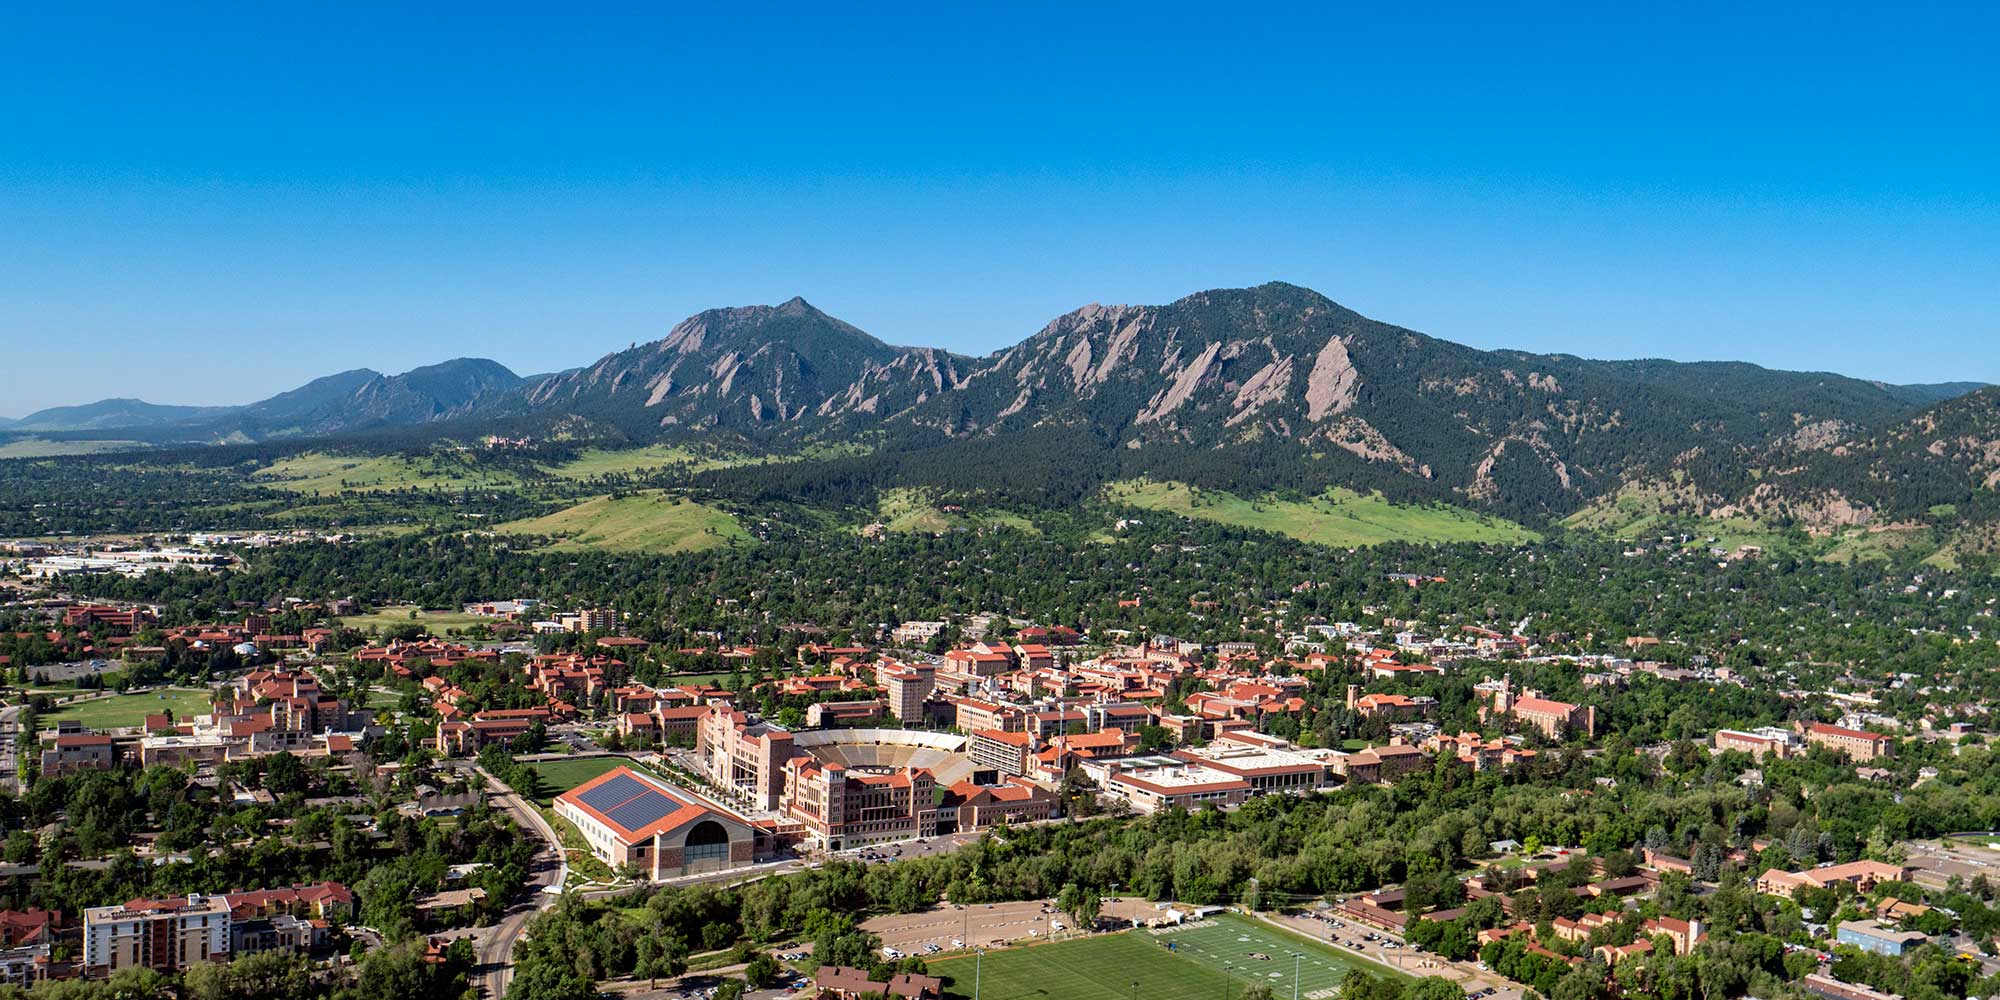 CU from above